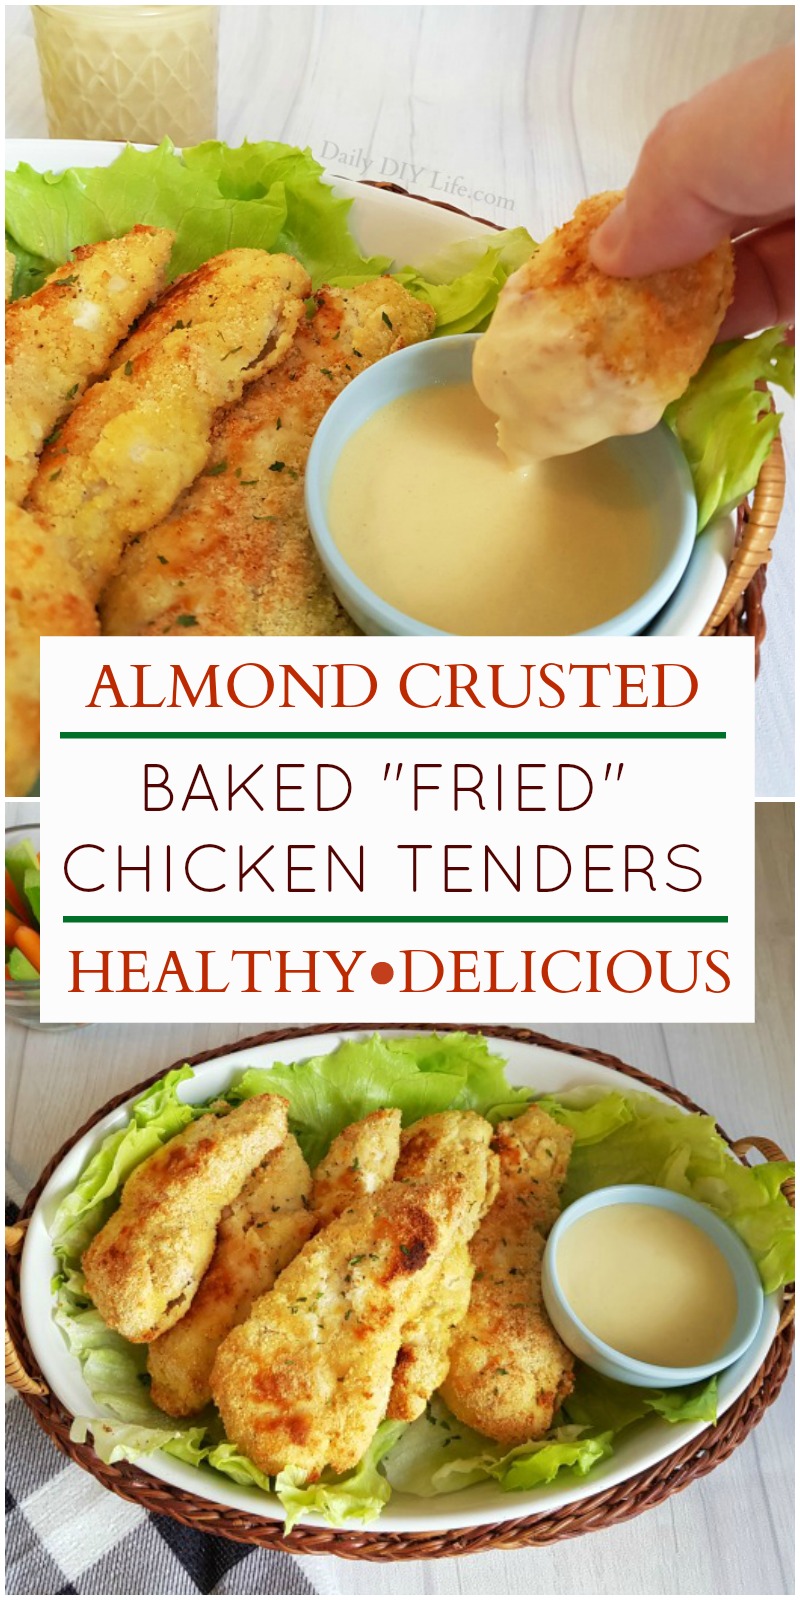 These Almond Crusted Chicken Tenders are crunchy, delicious and full of flavor. Serve them up with a better-for-you honey mustard dipping sauce. Transforming traditional recipes into a meal that is a bit healthier for you can be as simple as switching out a few ingredients. We have lightened up this family favorite recipe without sacrificing any of the wonderful flavor. You won't be disappointed! #Ad #Collectivebias #ChooseMazola #ChickenDinners #AlmondFlourRecipes #GreekYogurtRecipes #ChickenRecipes #BakedChicken #EasyRecipes #DinnerIdeas #HealthyDinnerRecipes #LowCarbRecipes #KetoFriendly #Keto